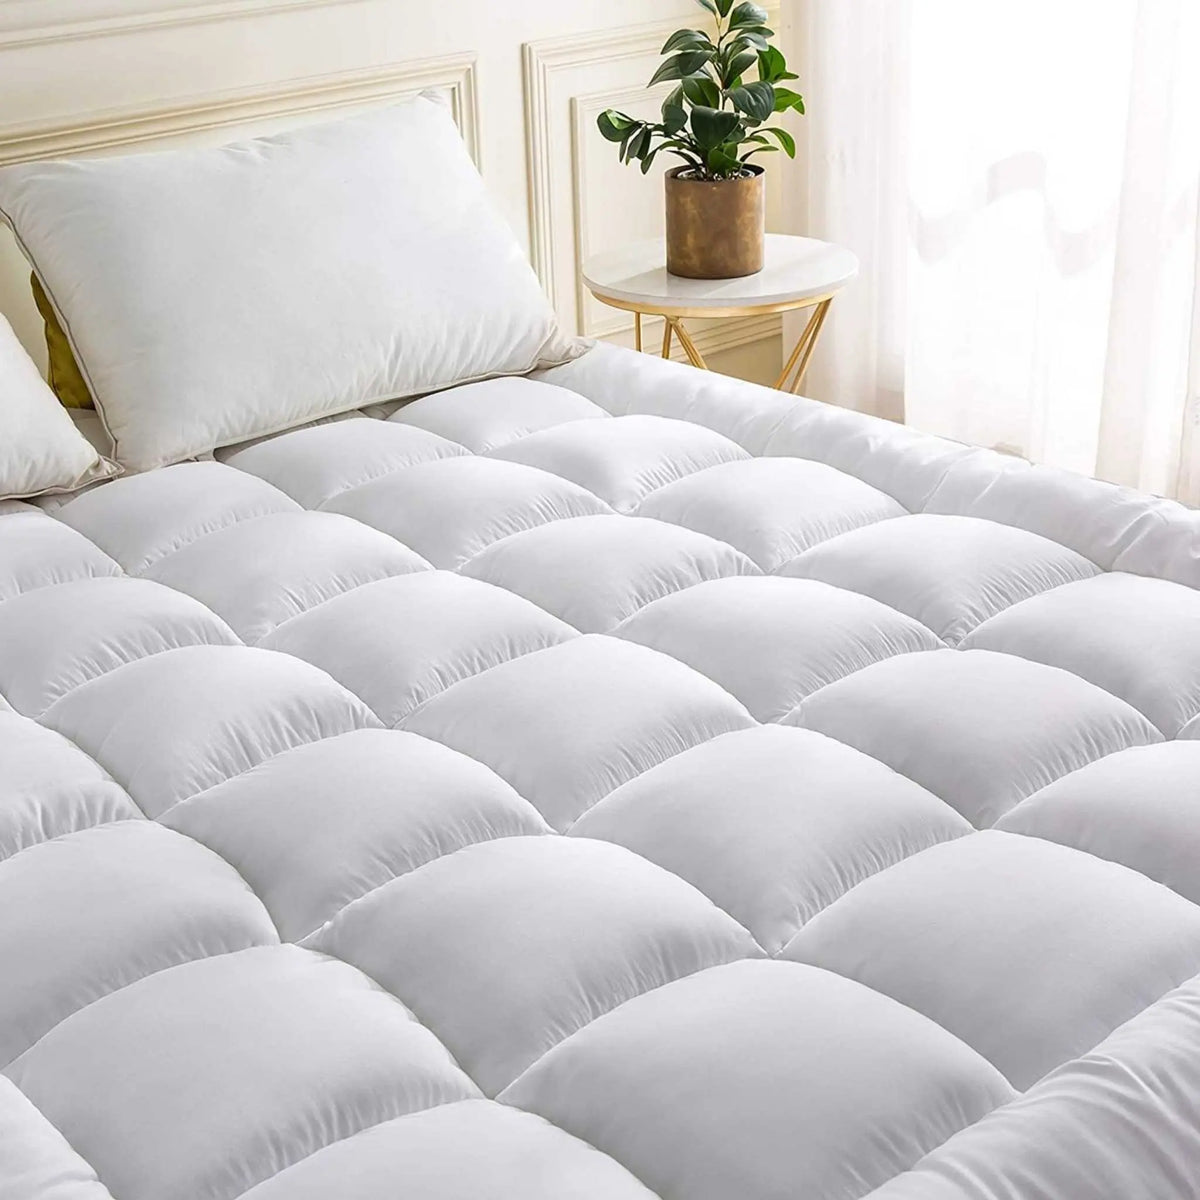 Hotel Quality Box Stitched Microfibre Mattress Topper 5cm Super soft Heavy Fill Orthopaedic Anti Allergy Quilted Mattress Topper - Beach Stone